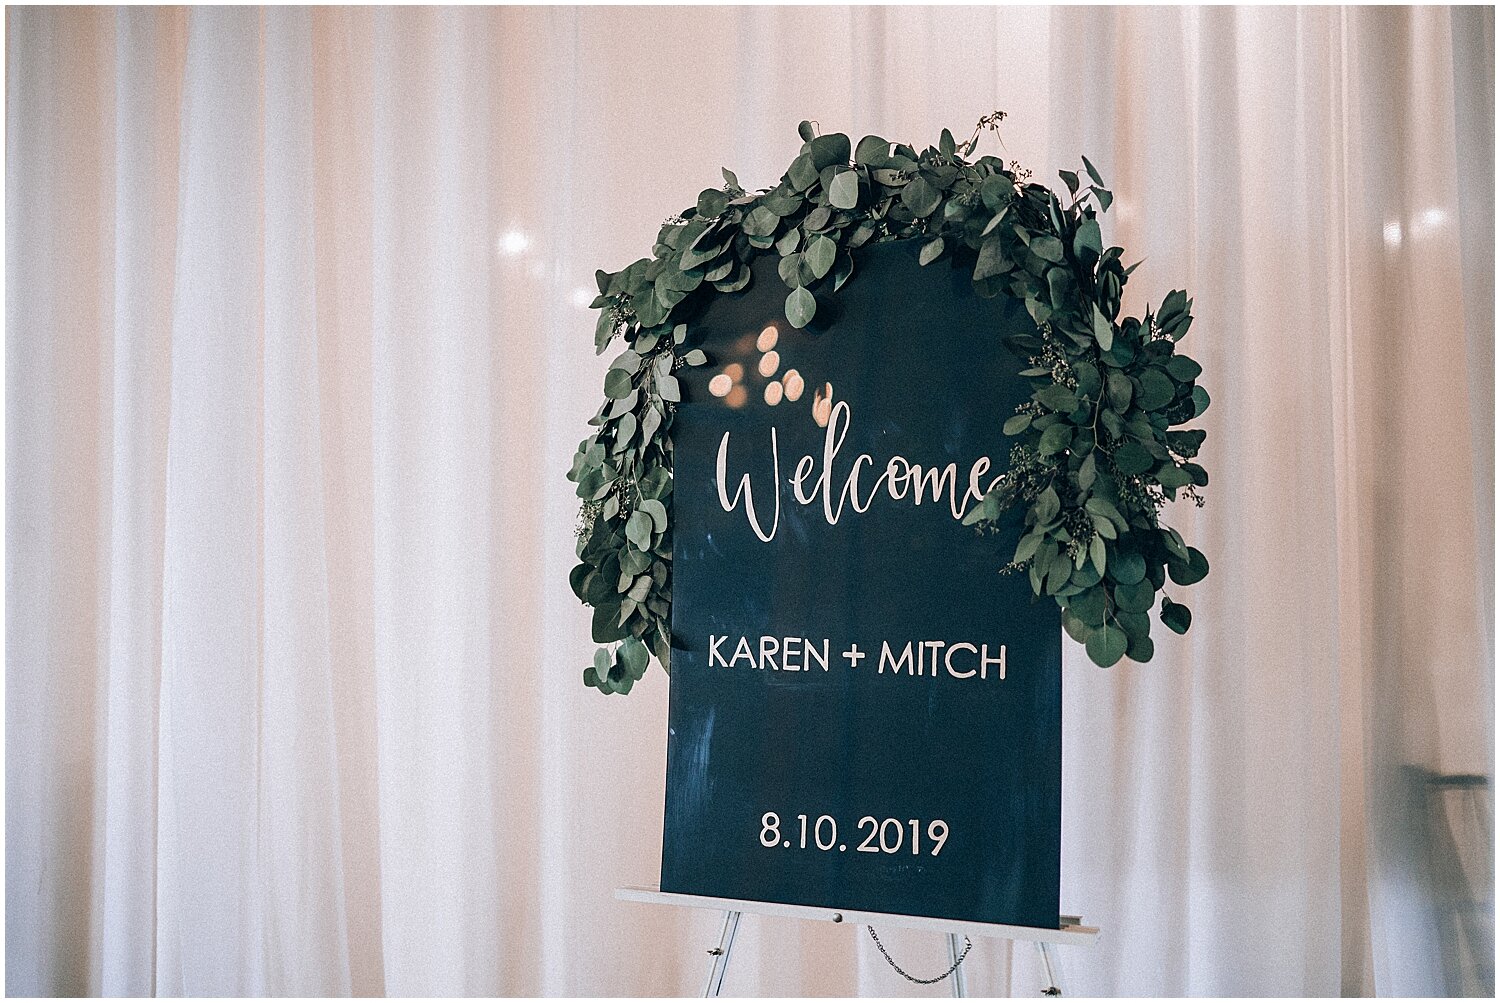  Welcome sign with greenery decor  